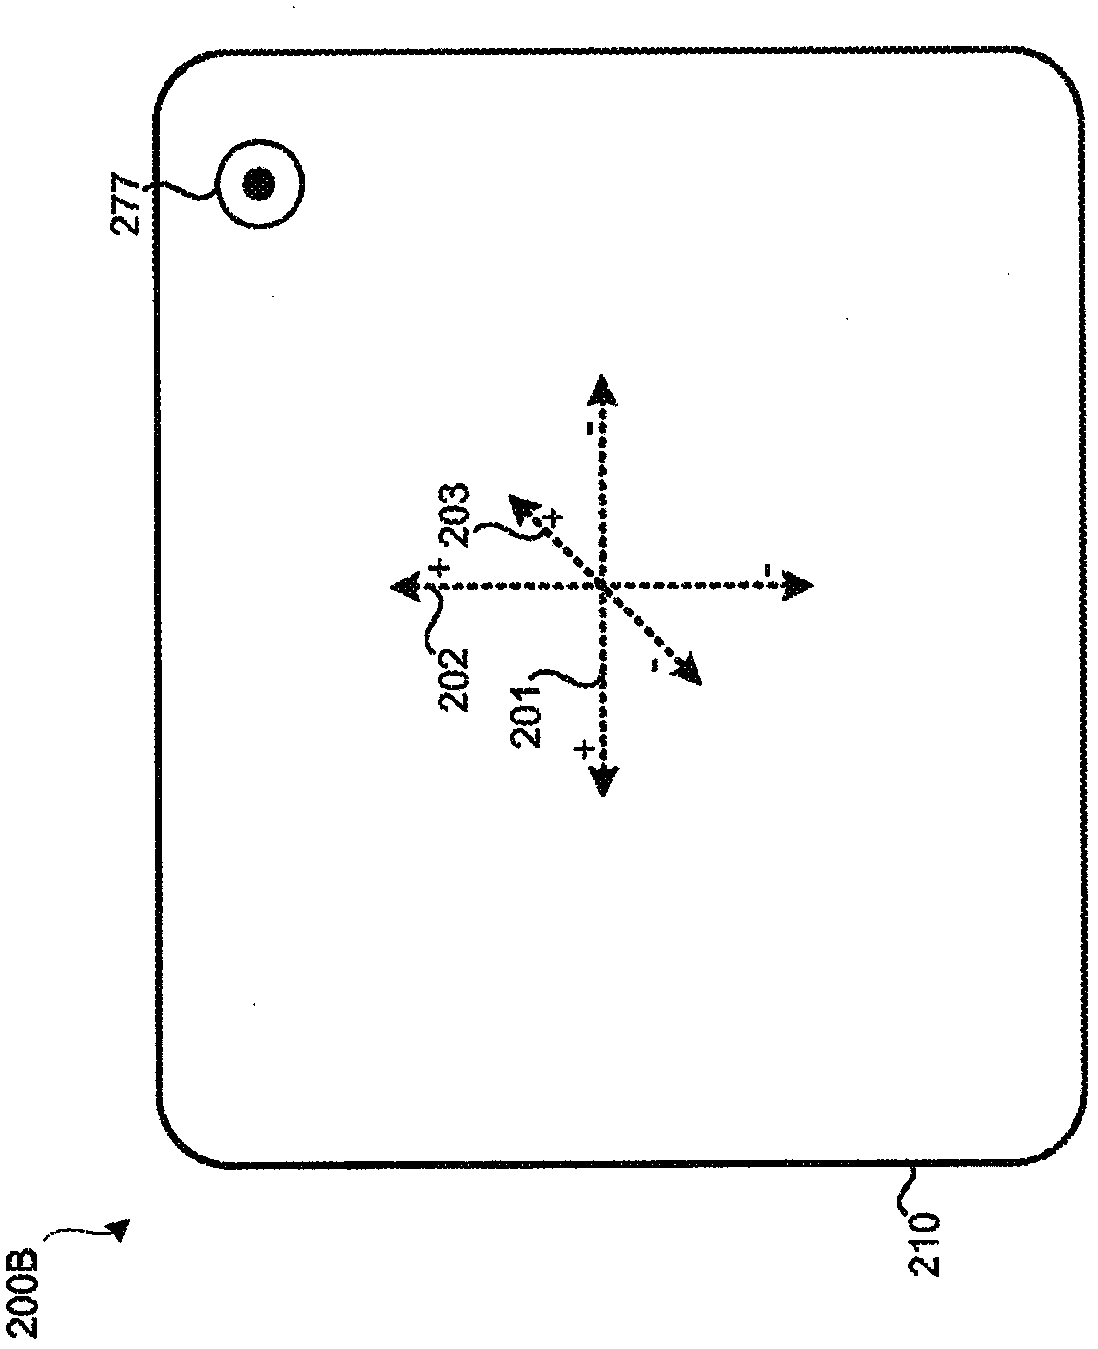 Controlling access to a mobile device